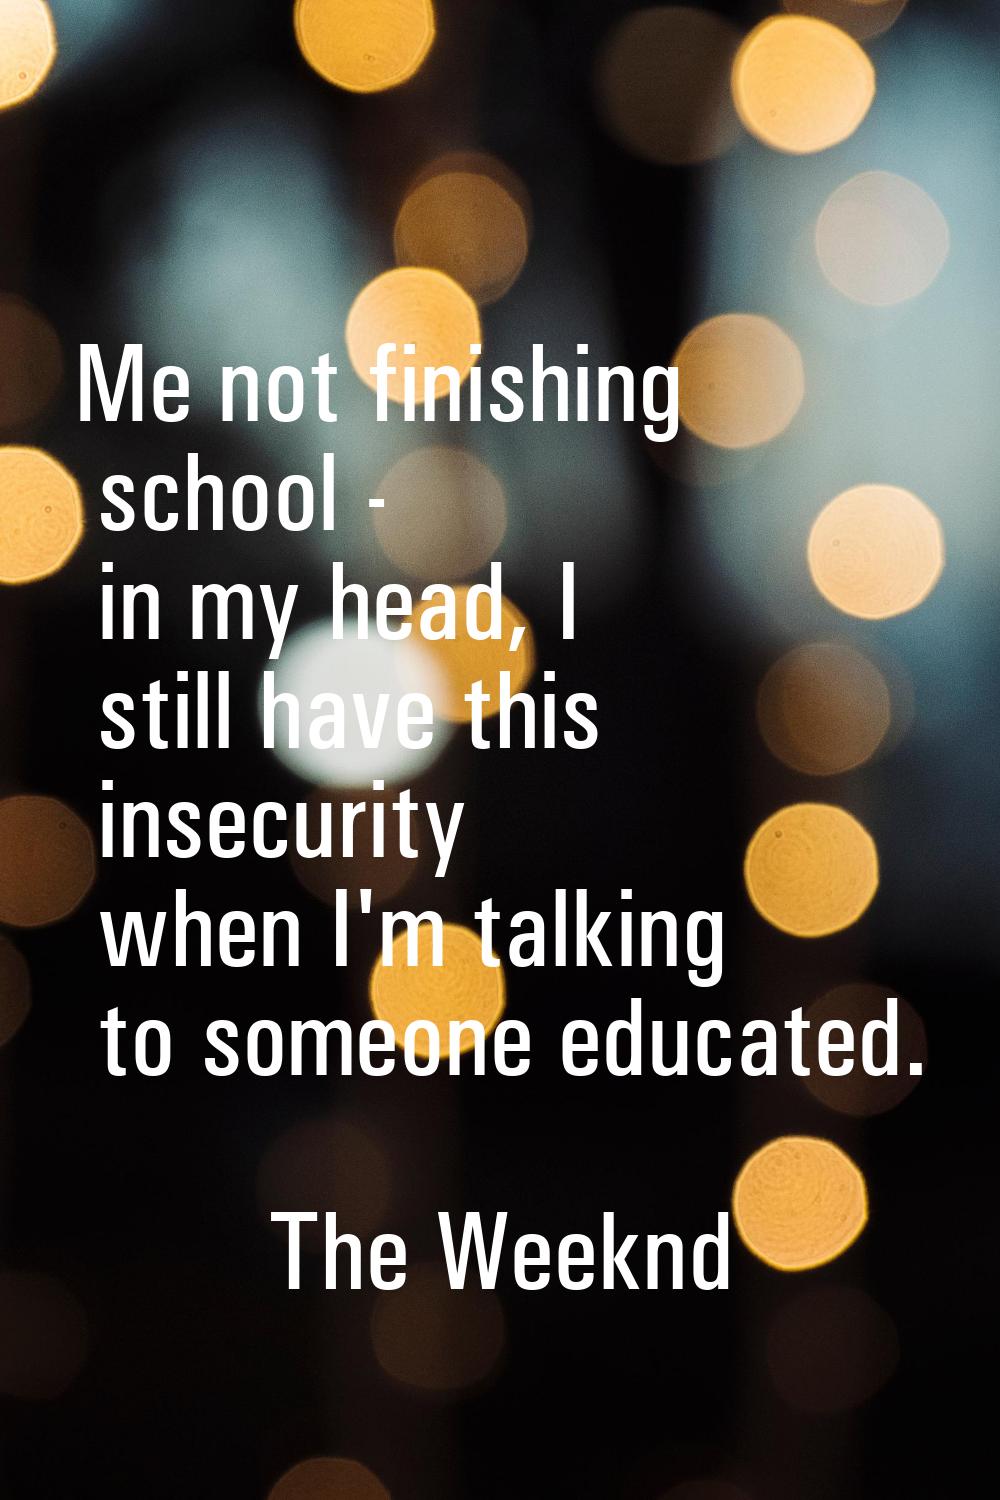 Me not finishing school - in my head, I still have this insecurity when I'm talking to someone educ